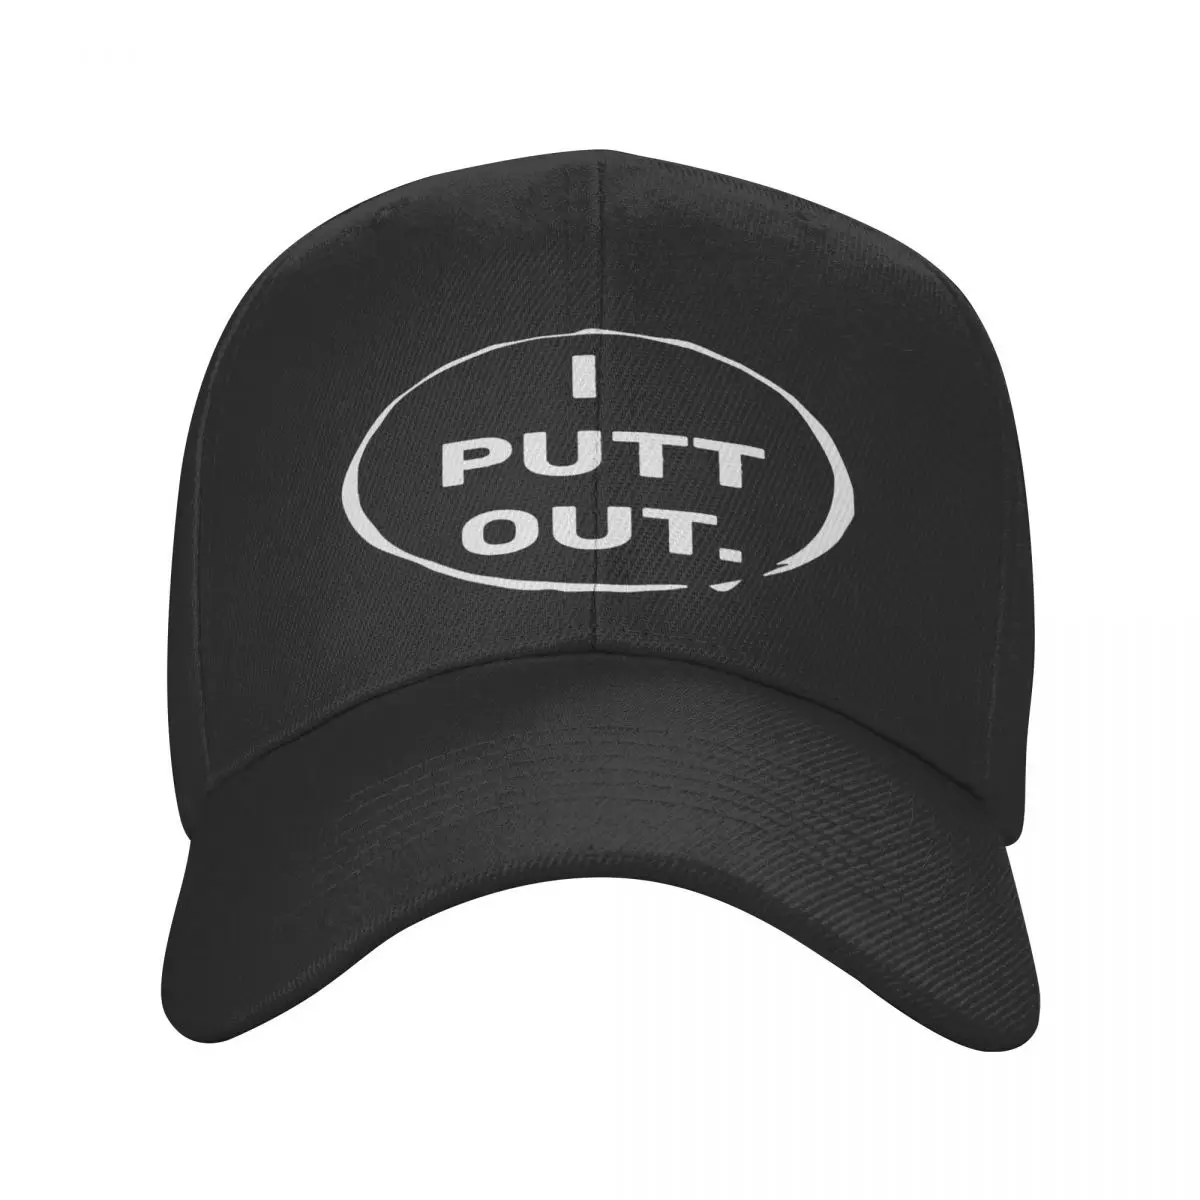 I Putt Out Casquette, Polyester Cap Fashionable Unisex Sports Nice Gift